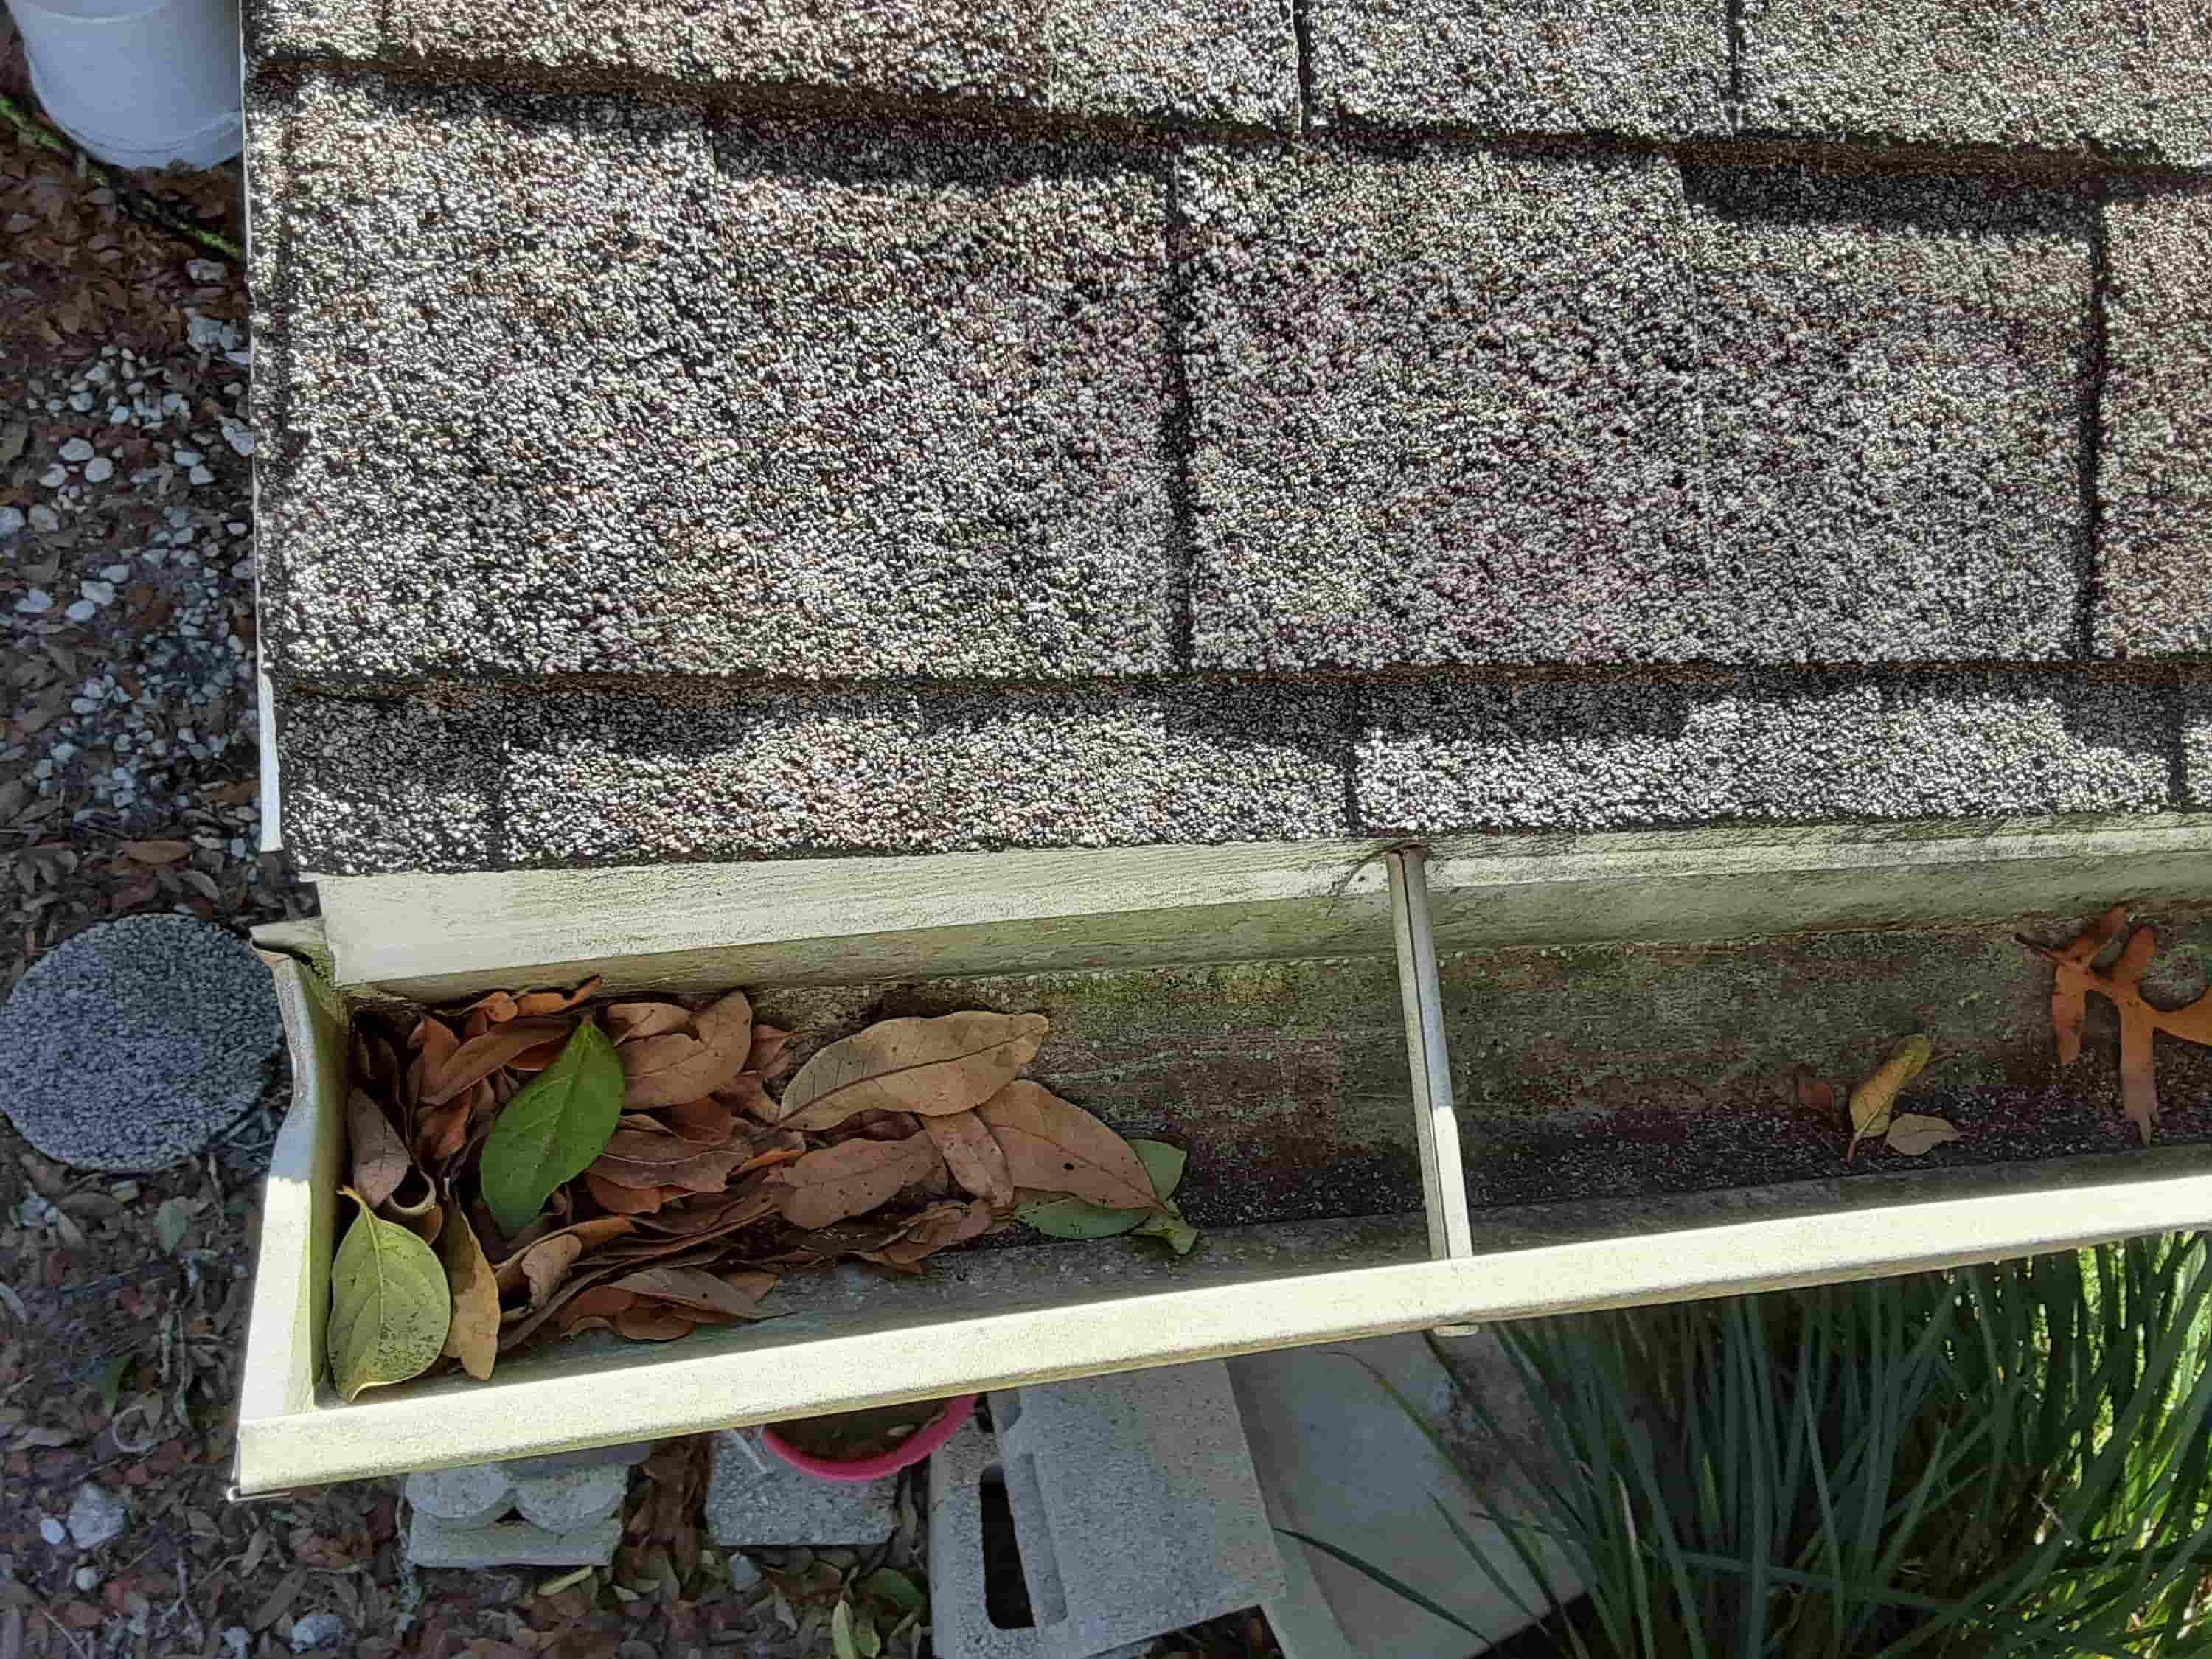 attachment for blower to clean gutters